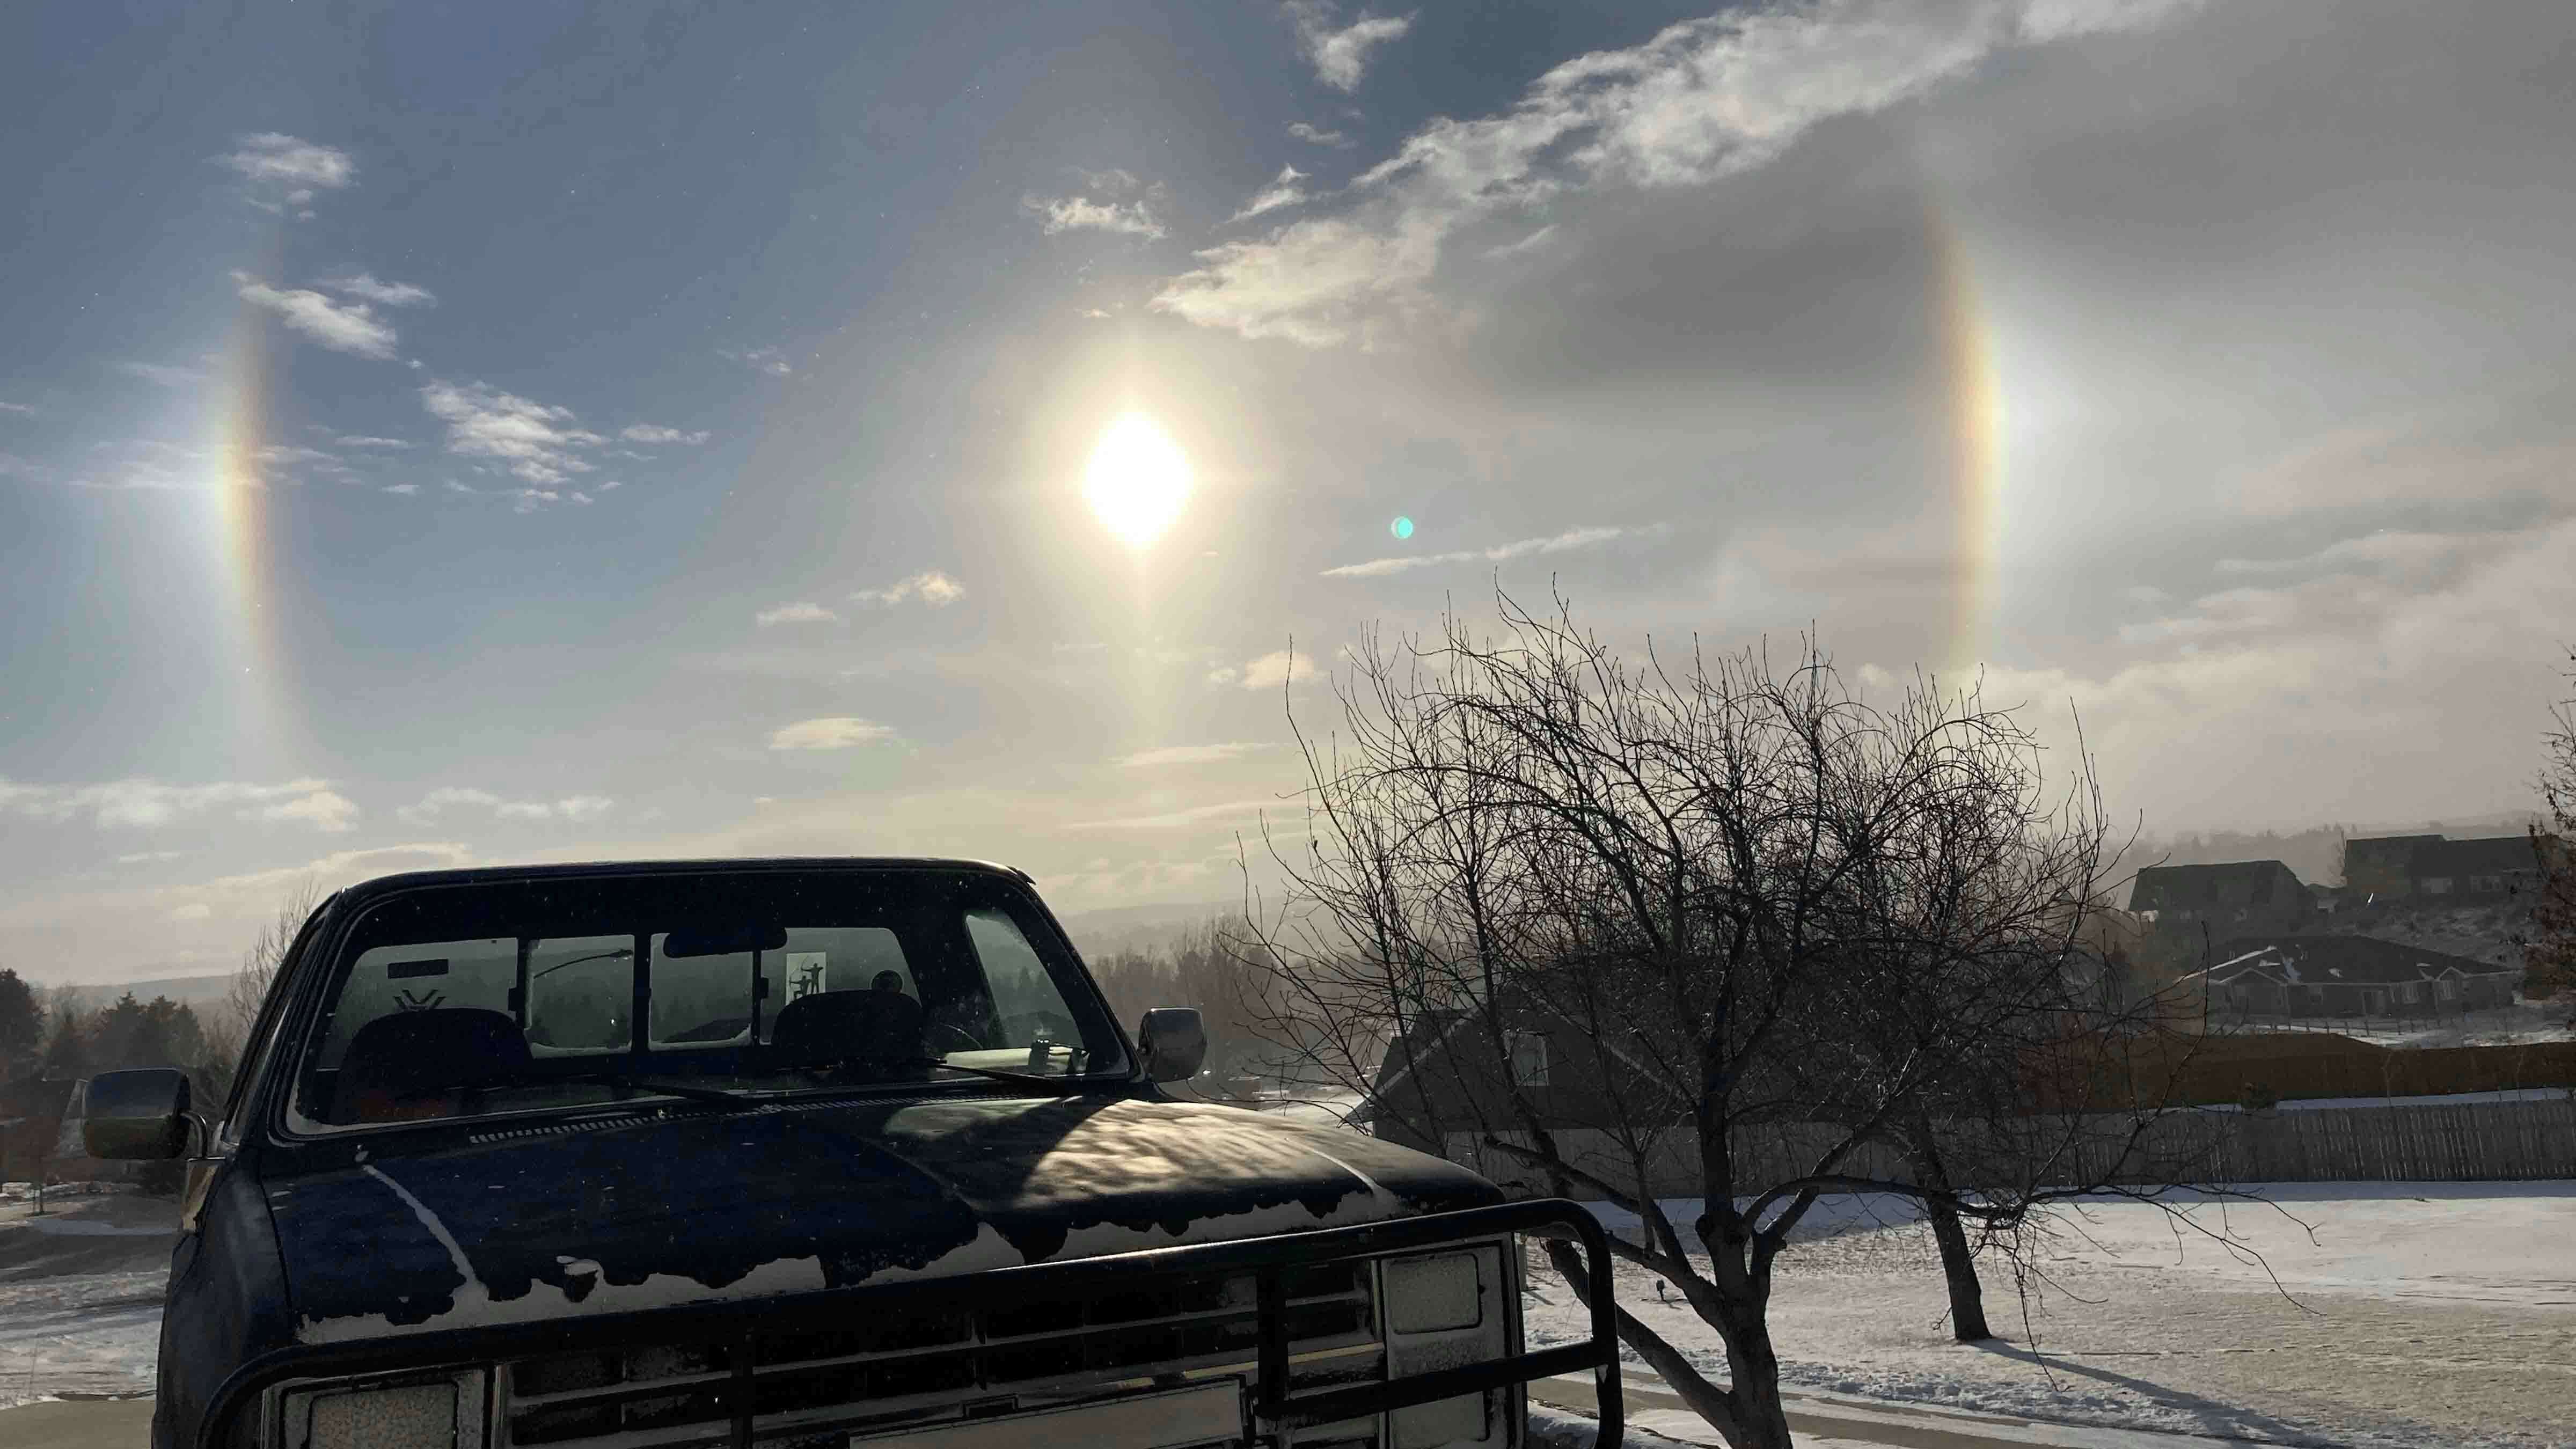 "Beautiful sun dog on this chilly morning in Buffalo! Taken 1/18/24"